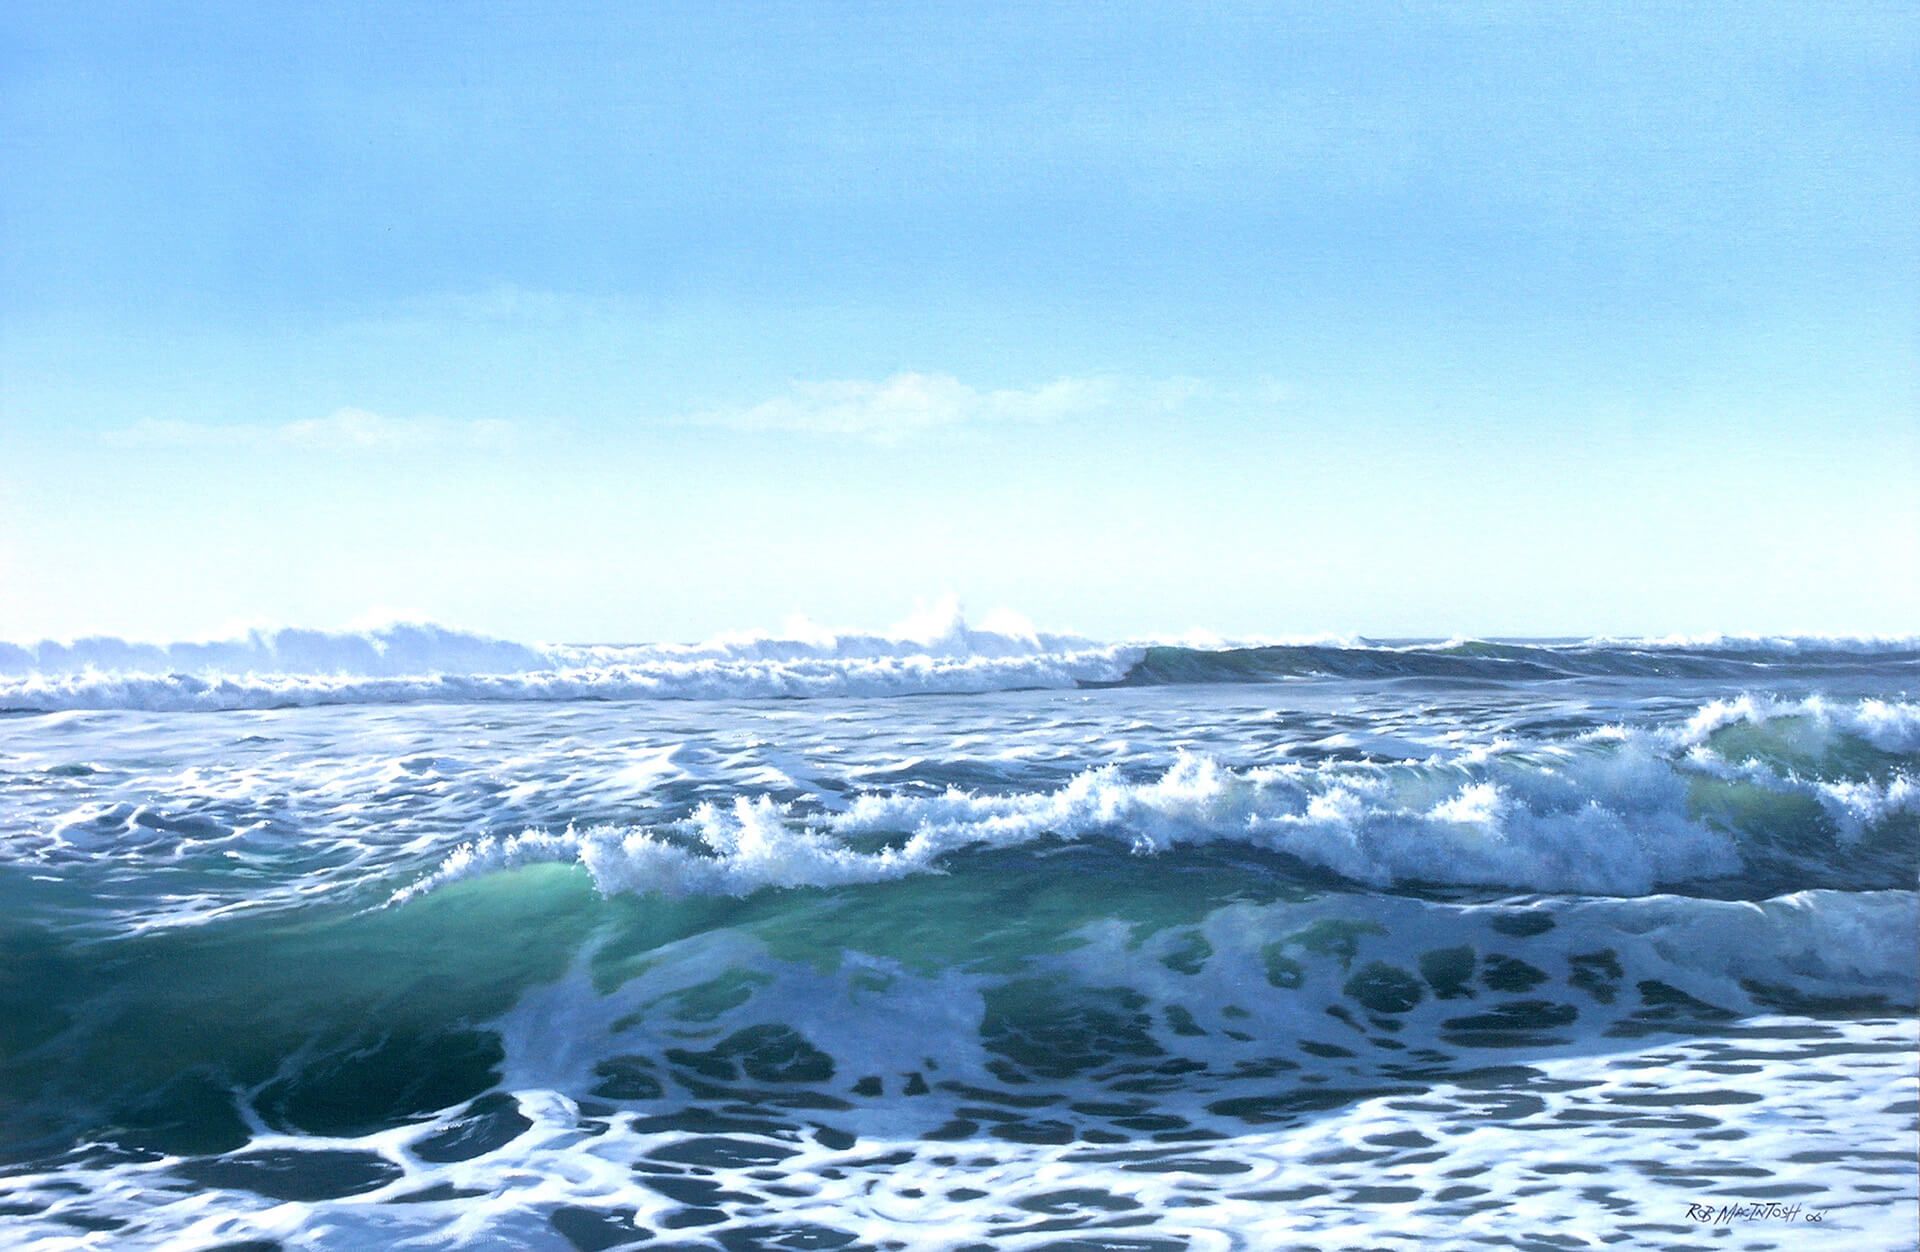 Photorealistic painting of a wave forming just before crashing